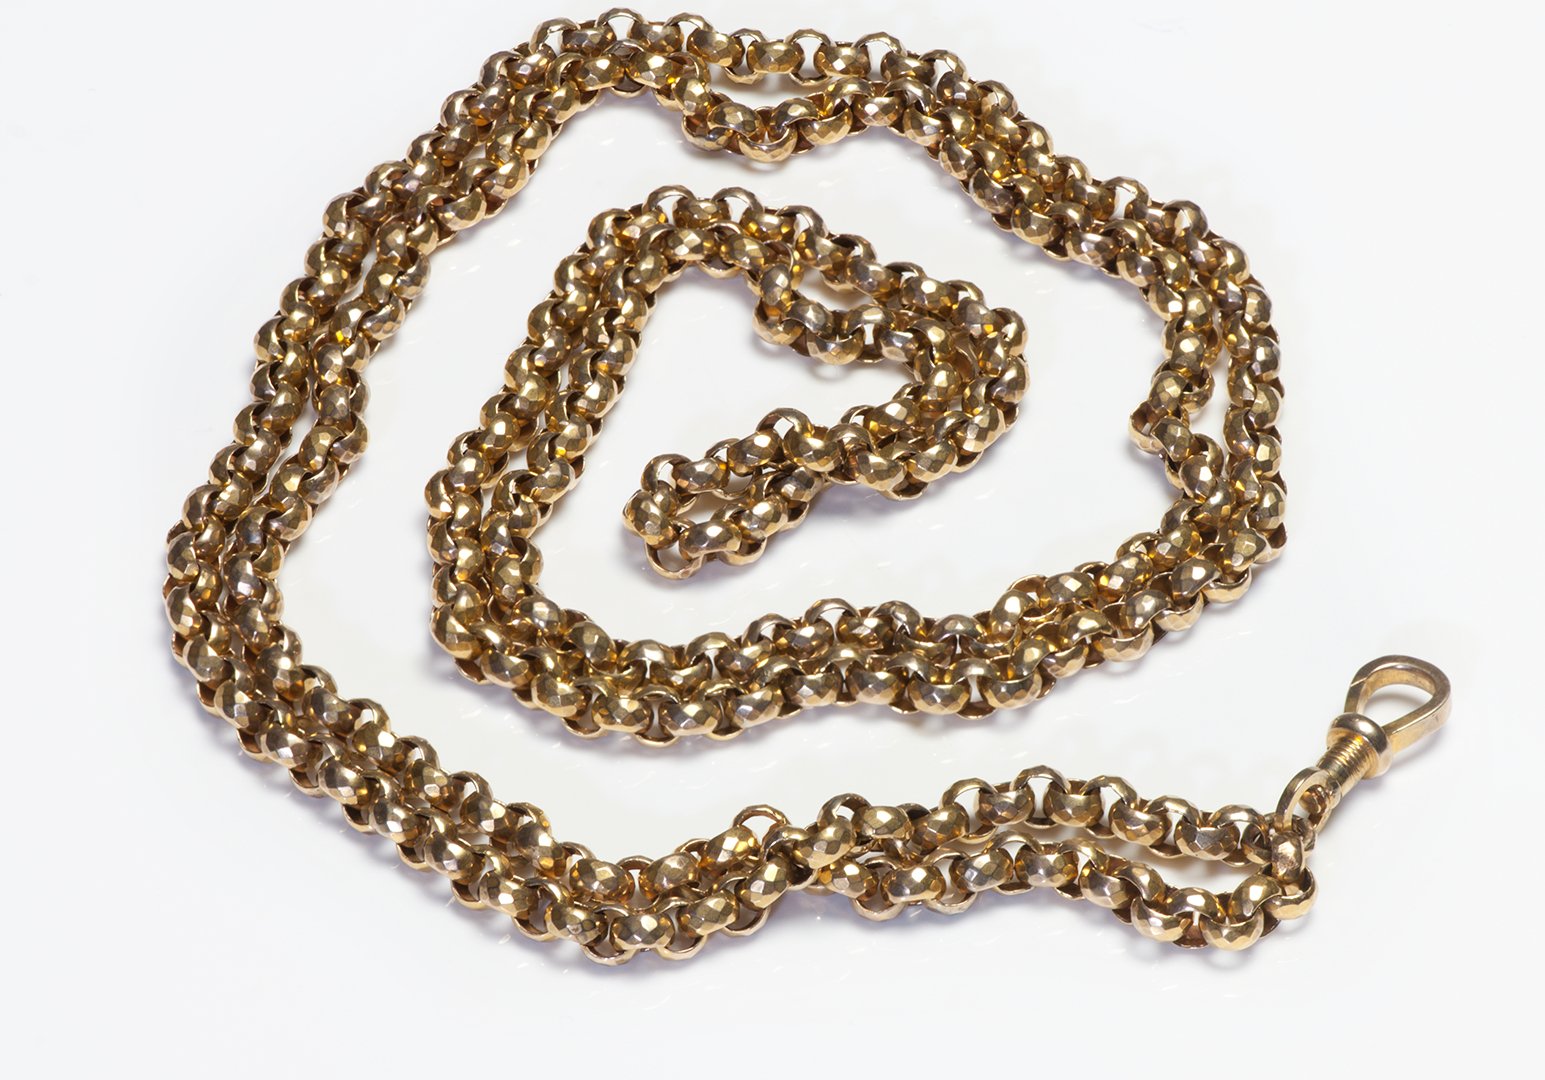 Antique Gold Long Faceted Chain - DSF Antique Jewelry